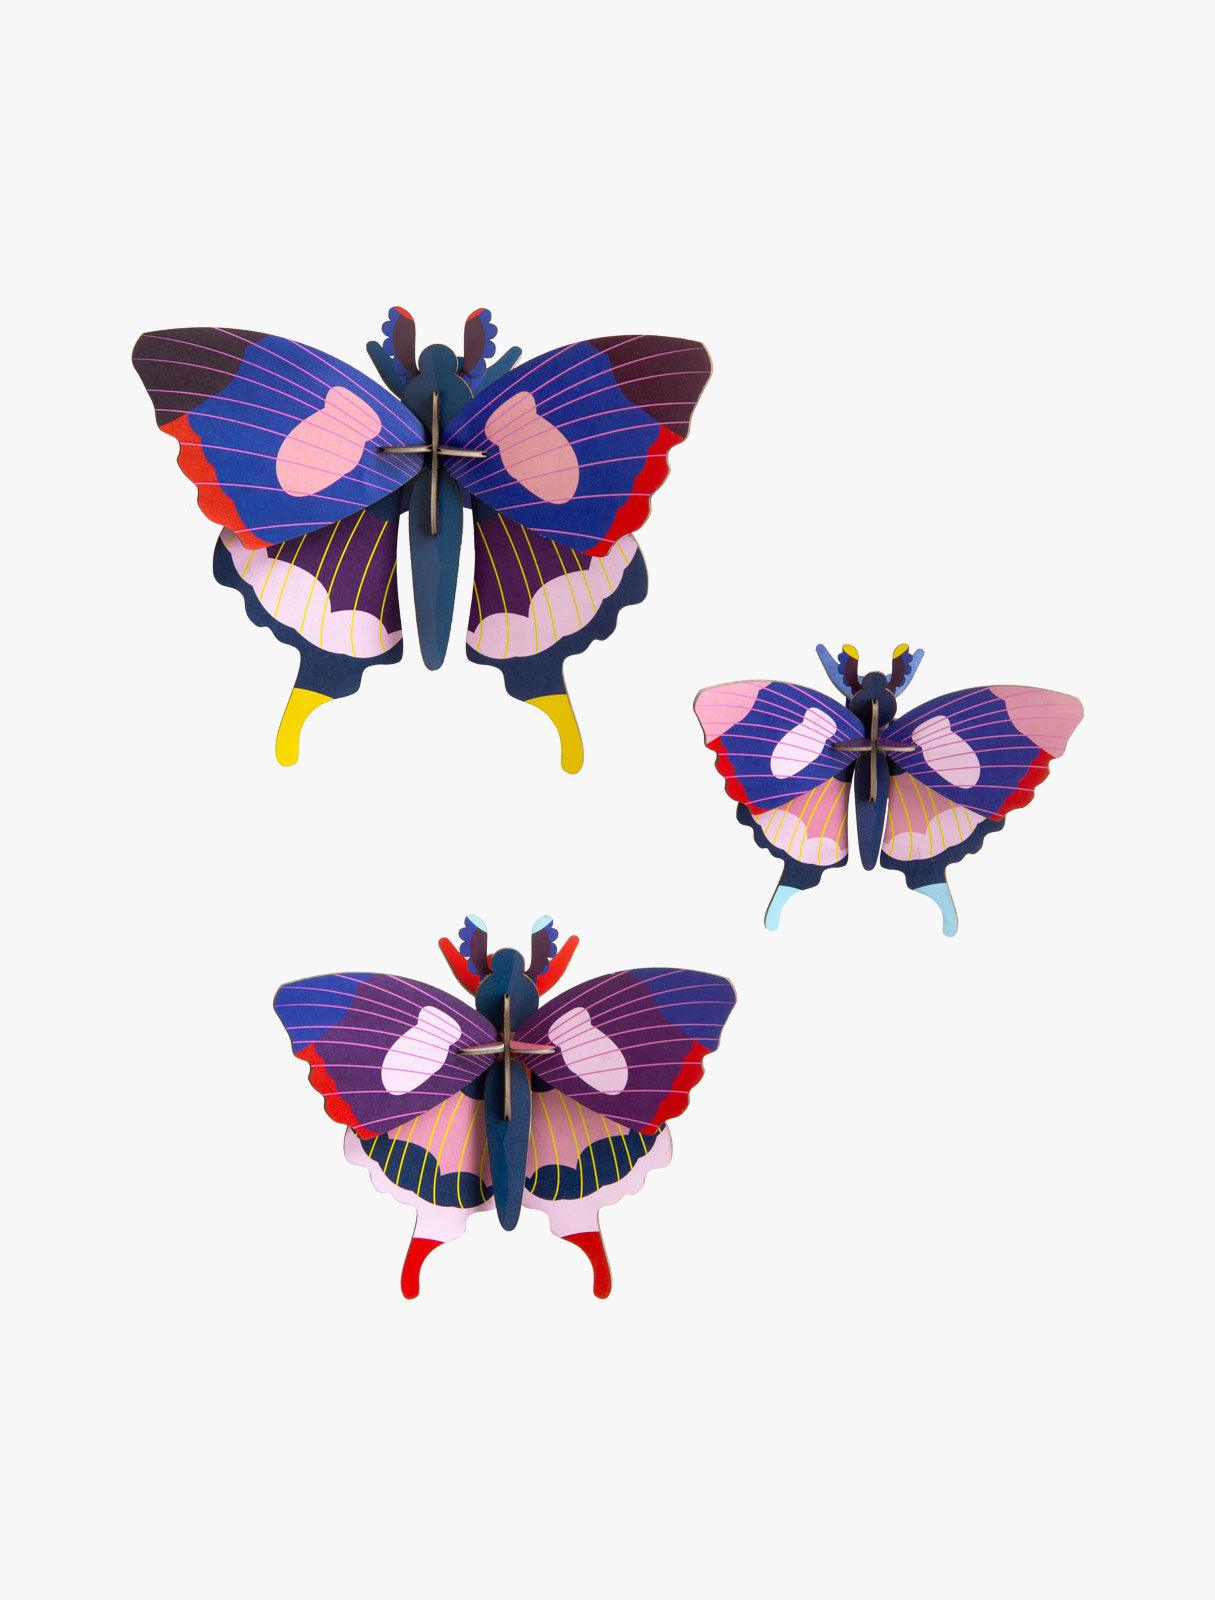 Swallowtail Butterfly - Set of Three - Gigglewick Gallery